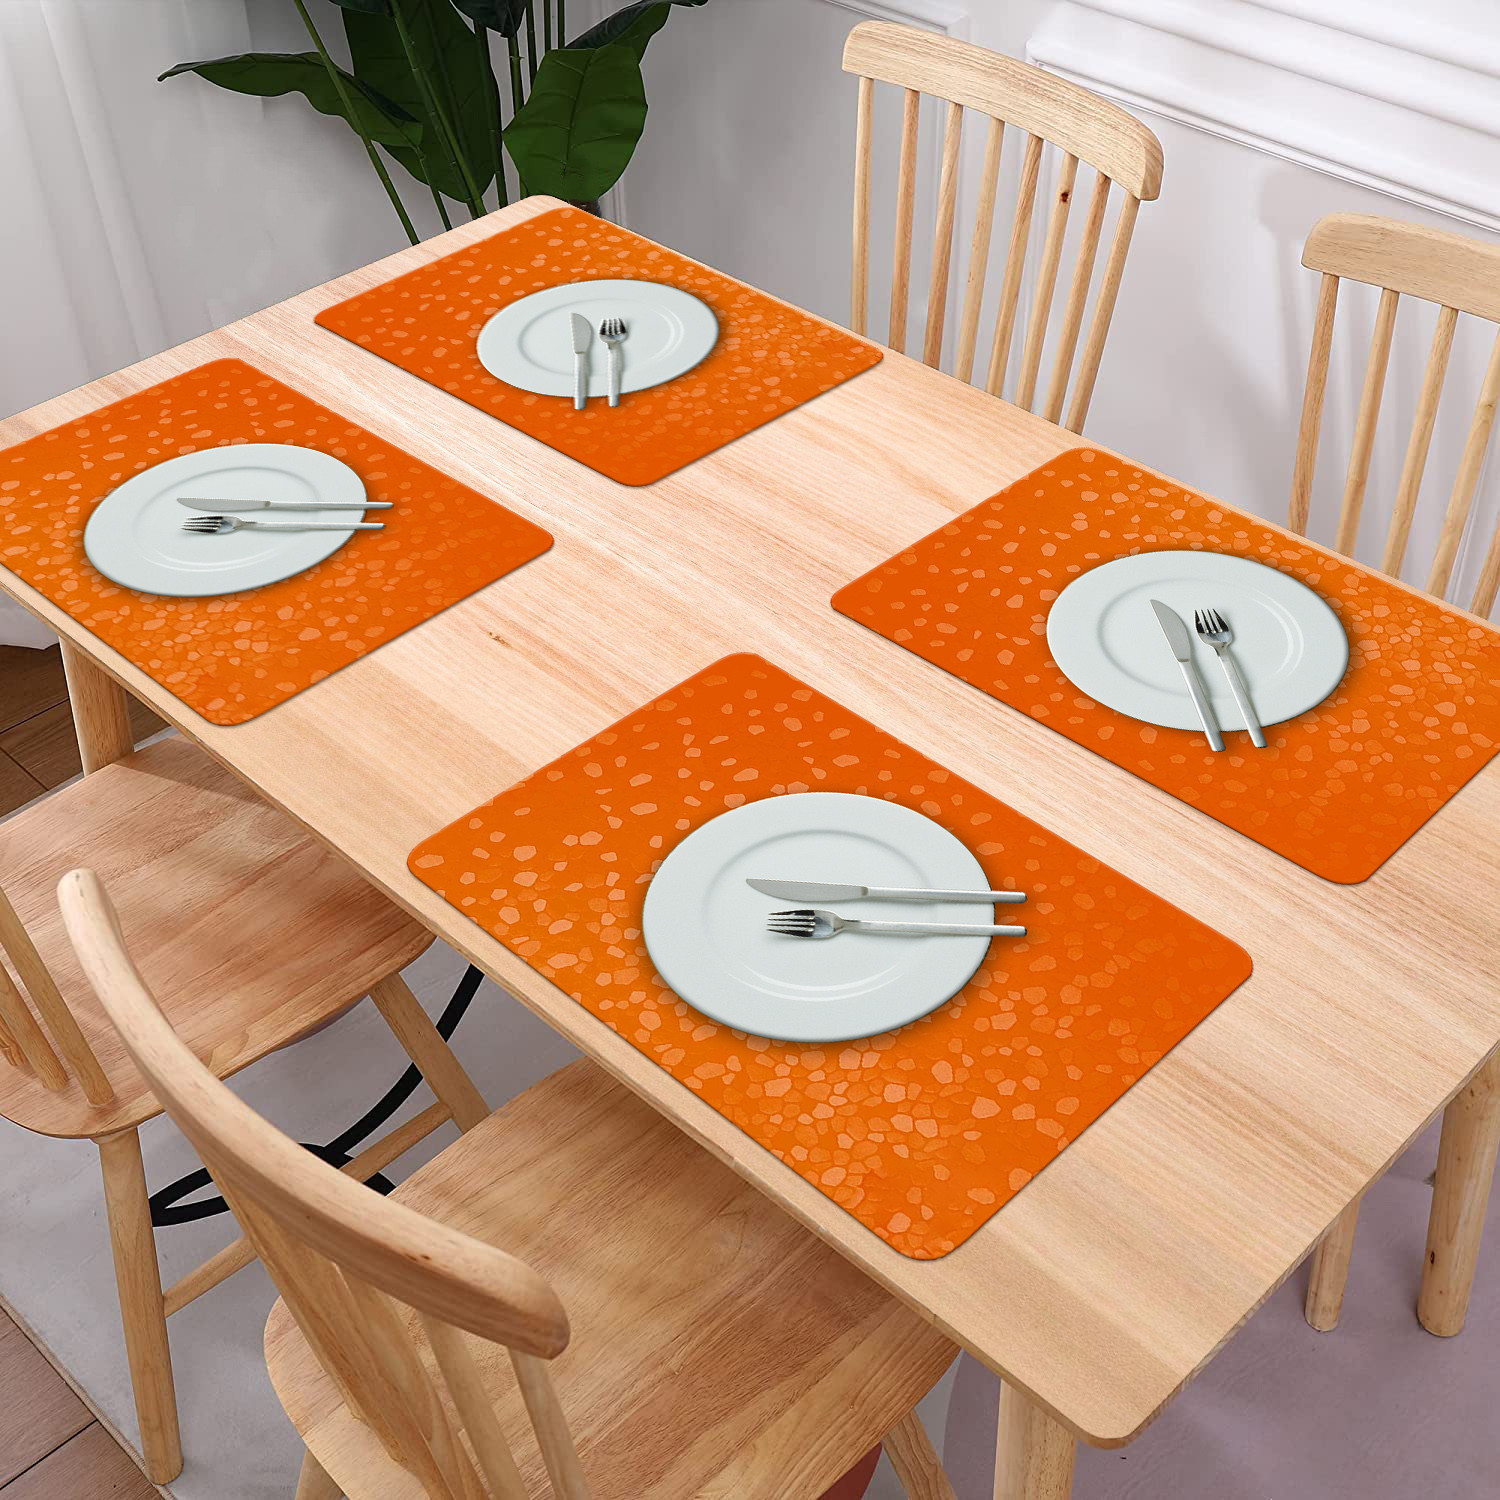 Kuber Industries Multiuses Stone Print PVC Table Placemat for kitchen, Dining Table Set of 6 (Orange)